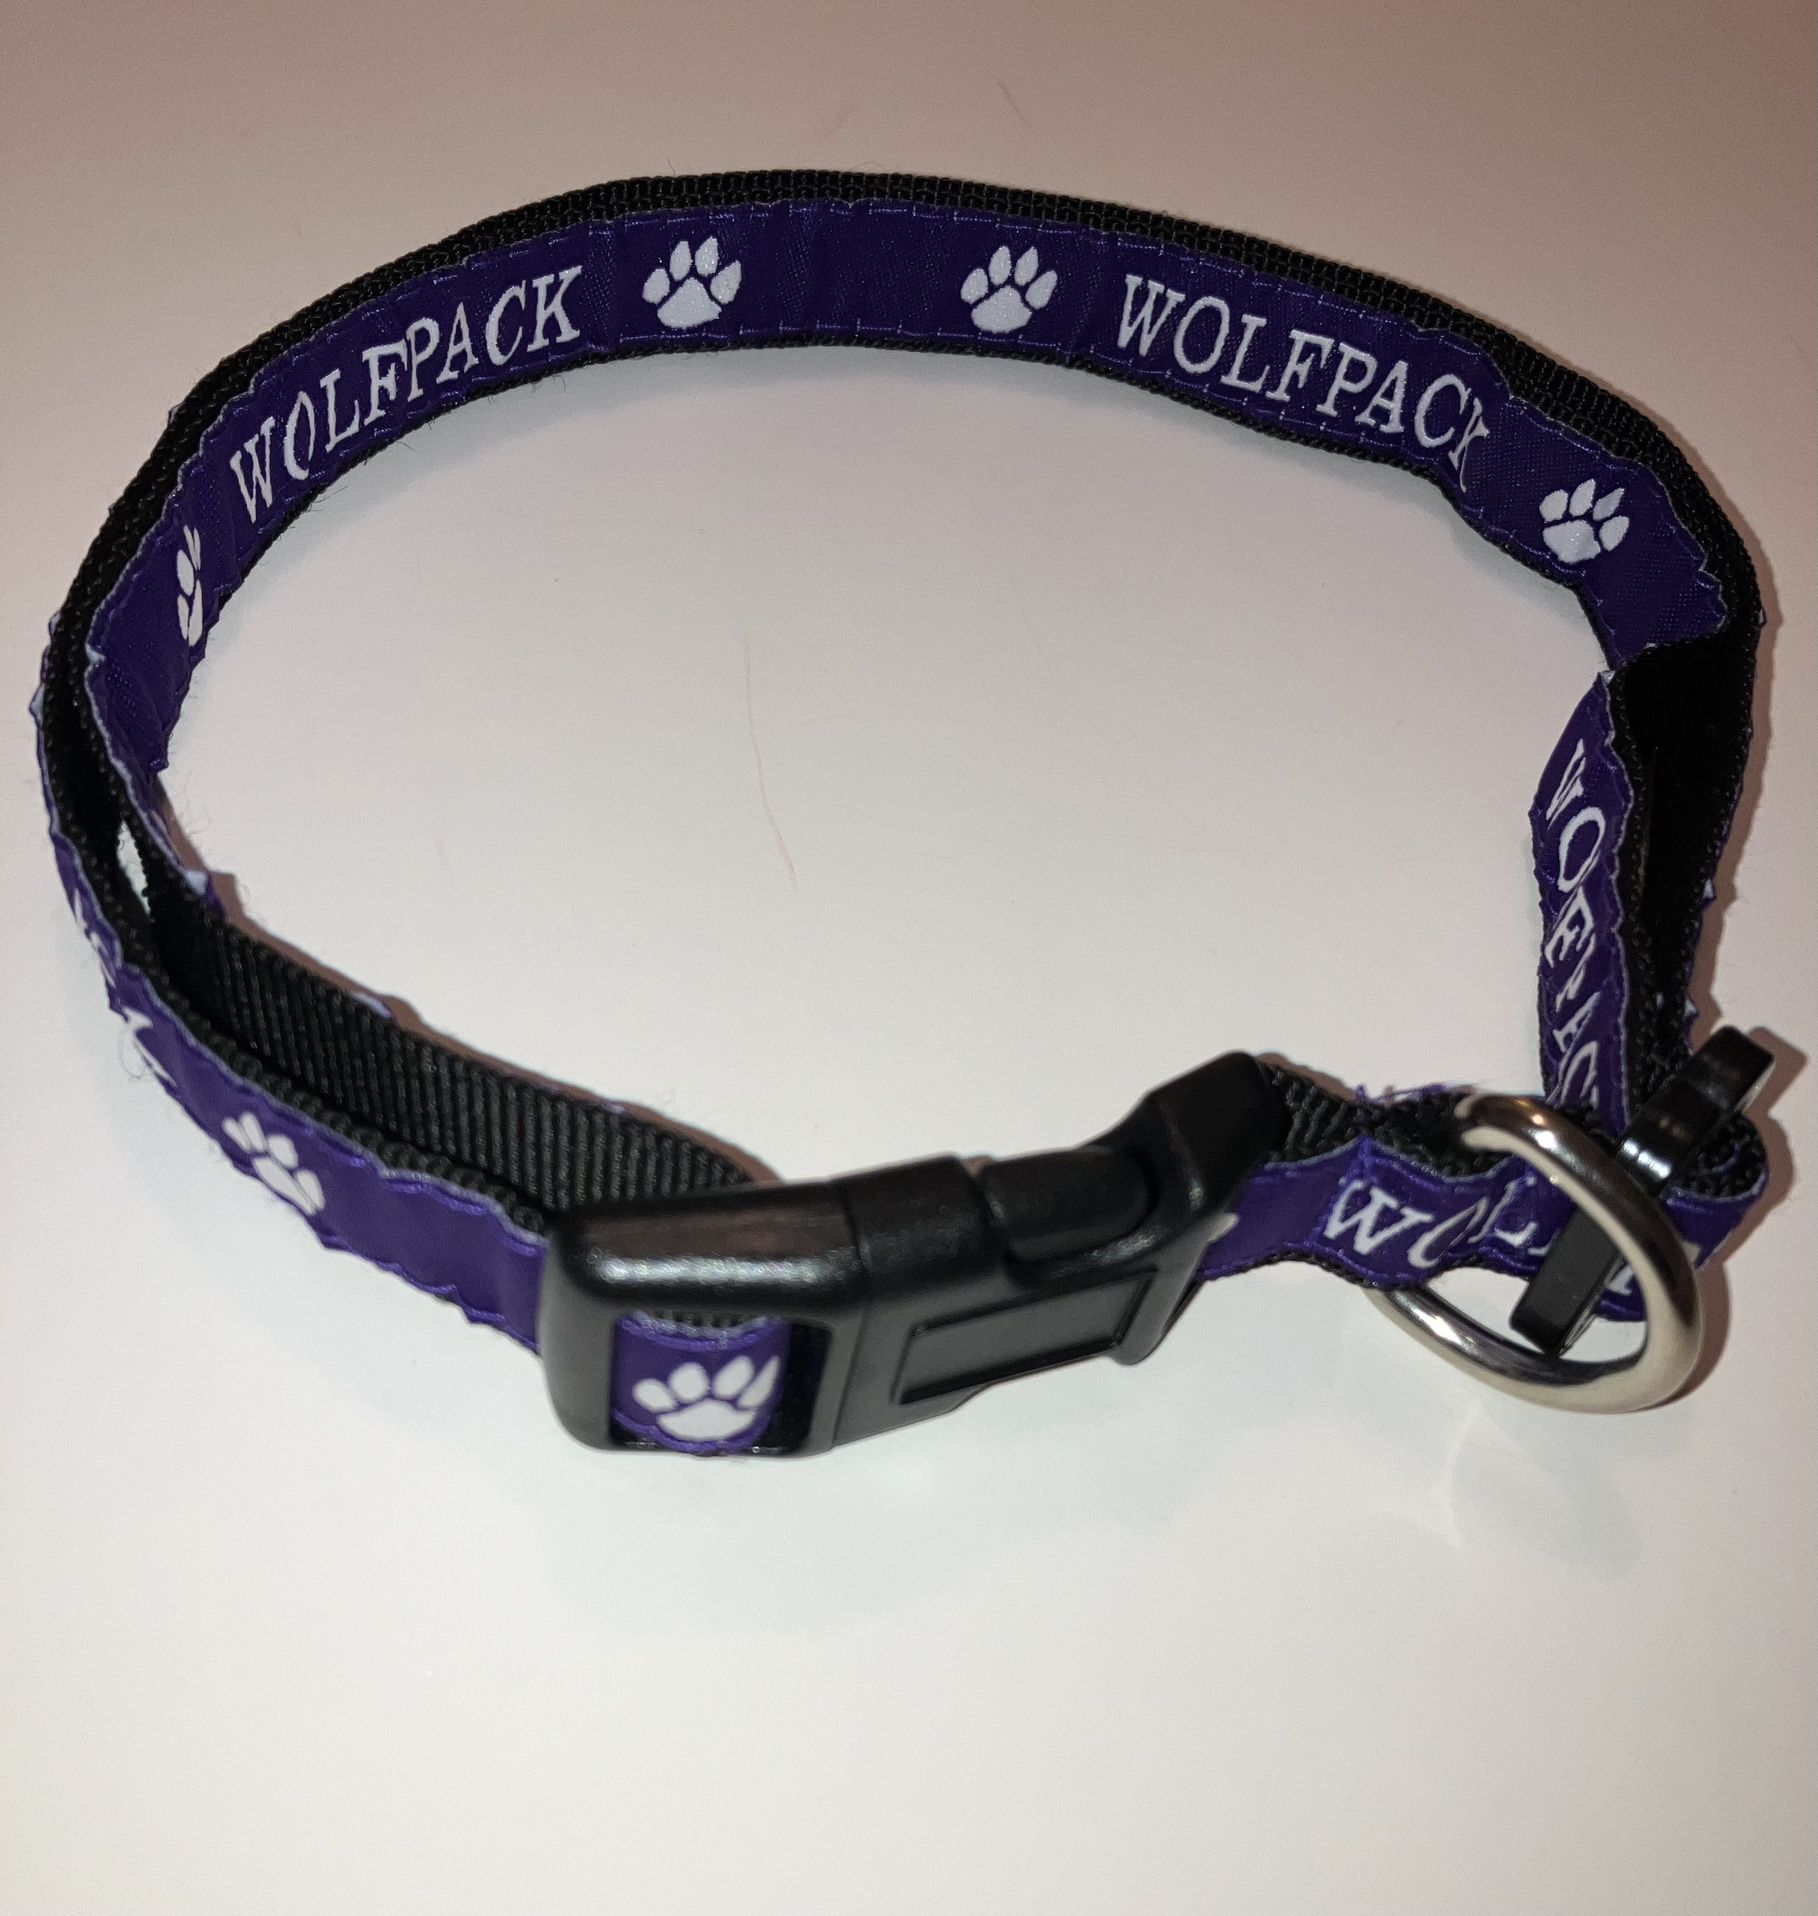 Dog Collar 🐶 | "Wolfpack" w Paw Prints 🐾 | Purple and Adjustable 🆕 🐕 